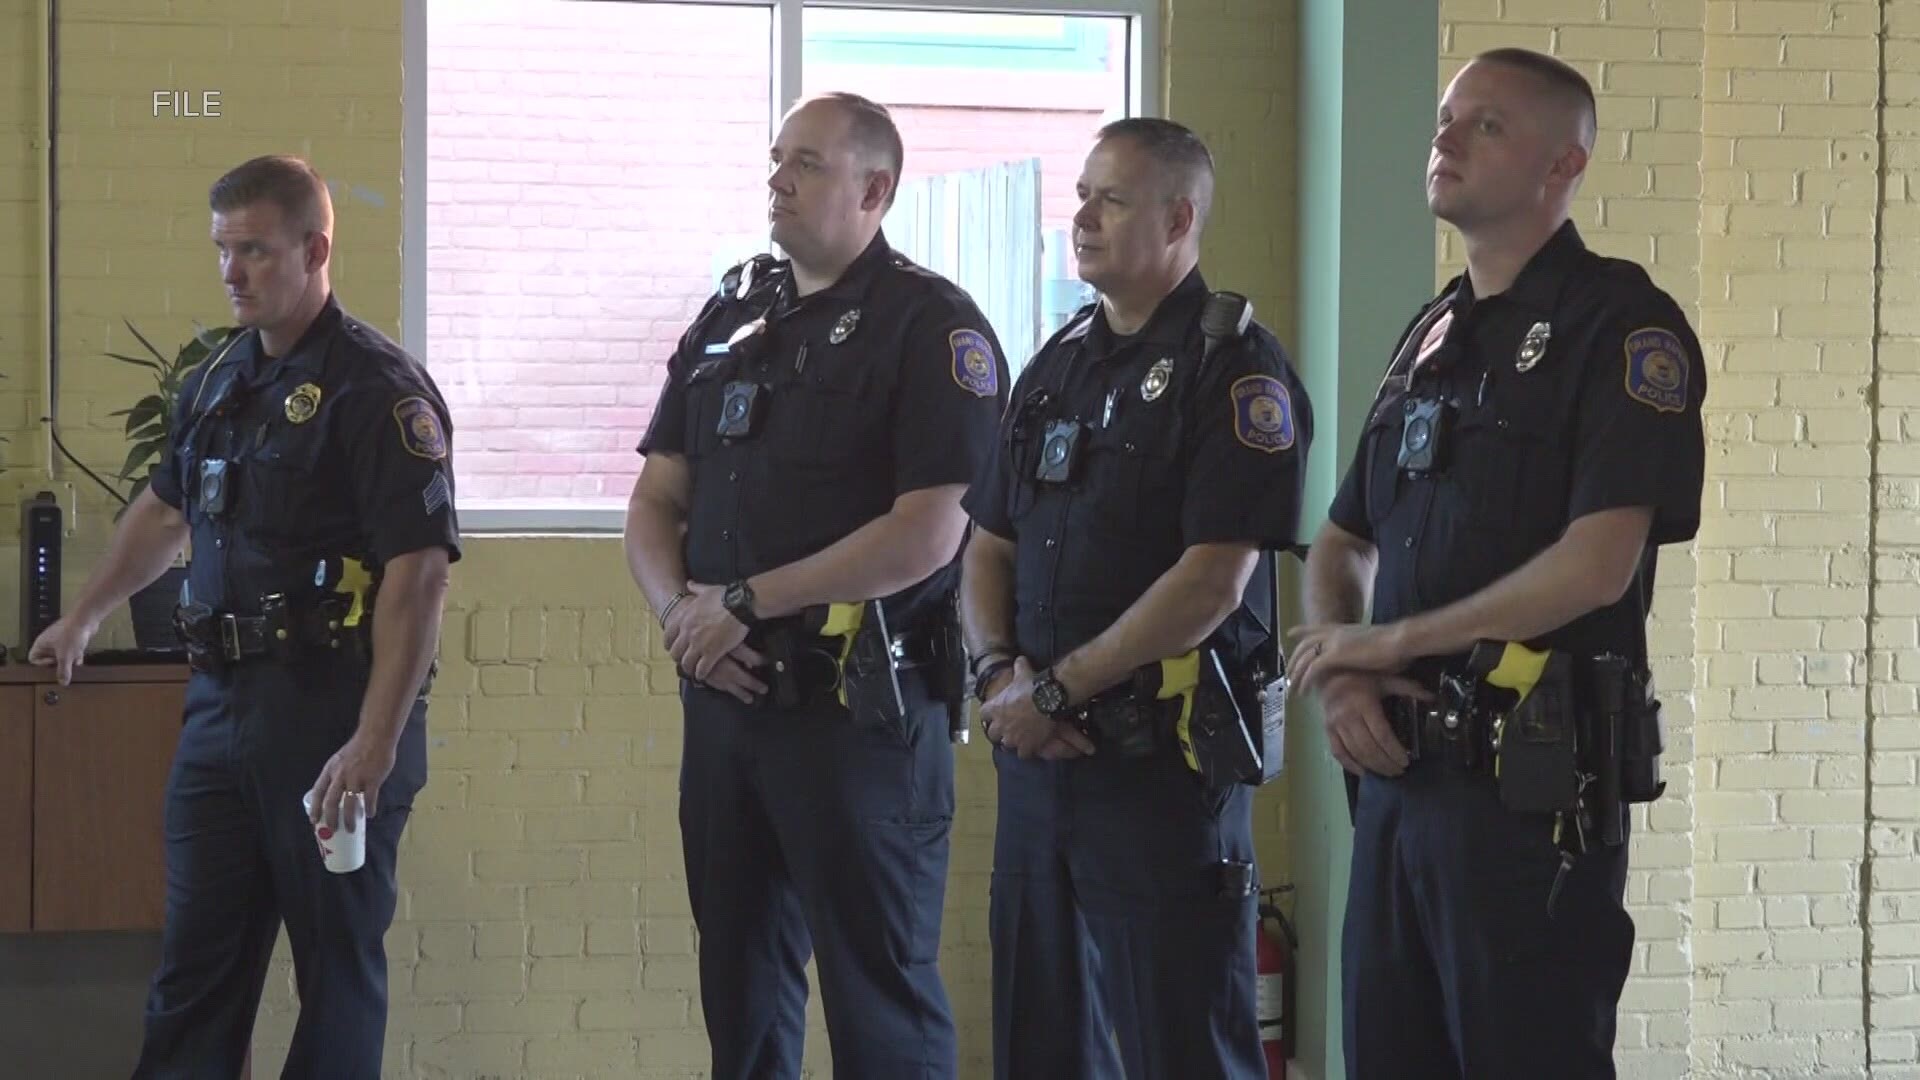 GRPD announced they'll assign 4 officers per neighborhood to increase community relations.